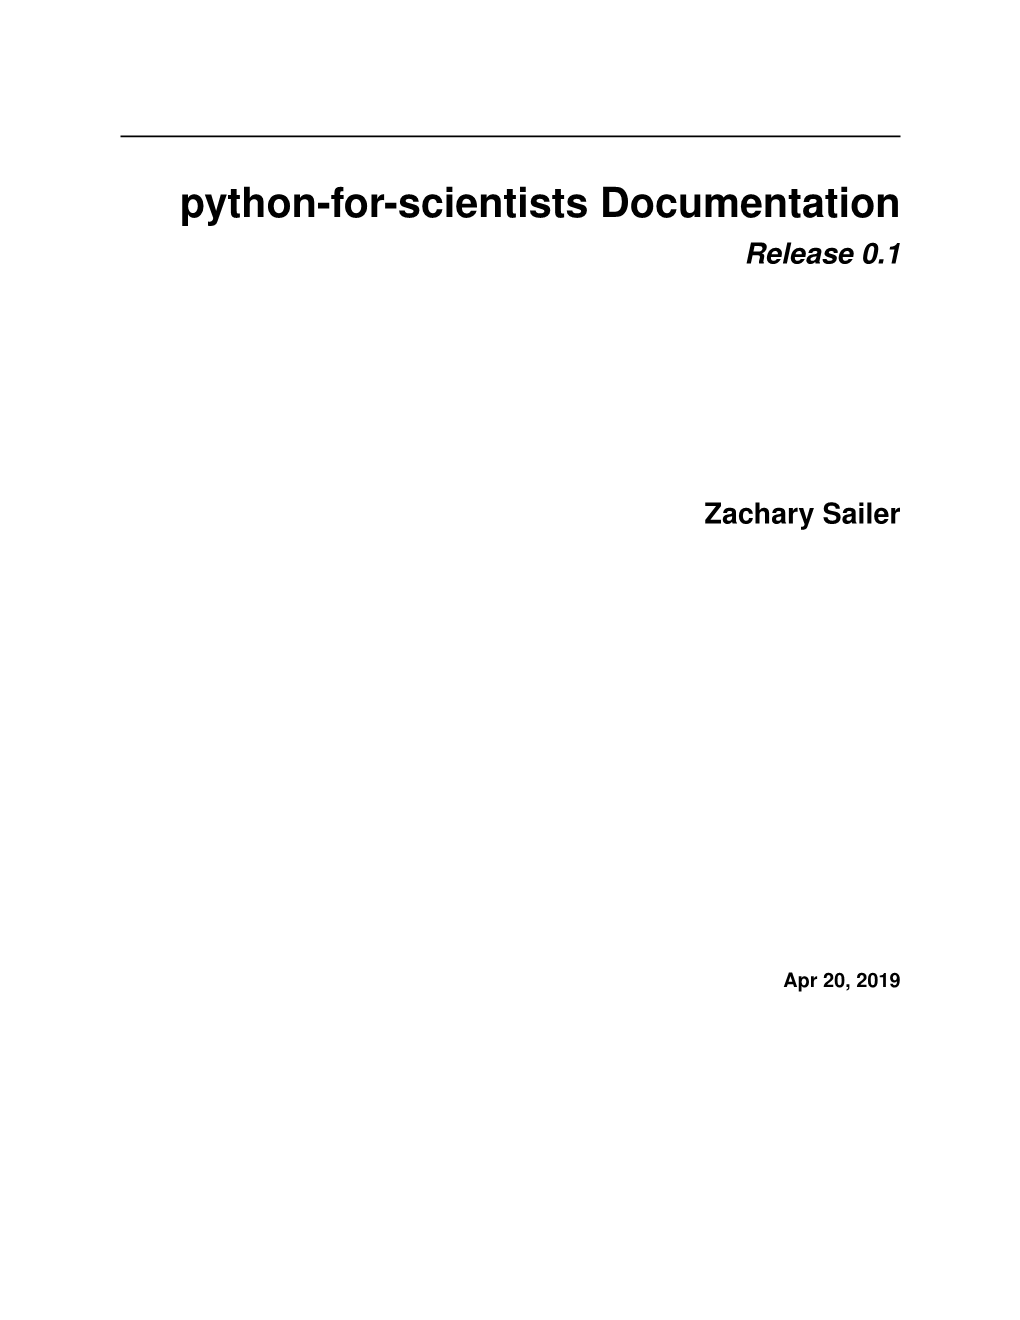 Python-For-Scientists Documentation Release 0.1